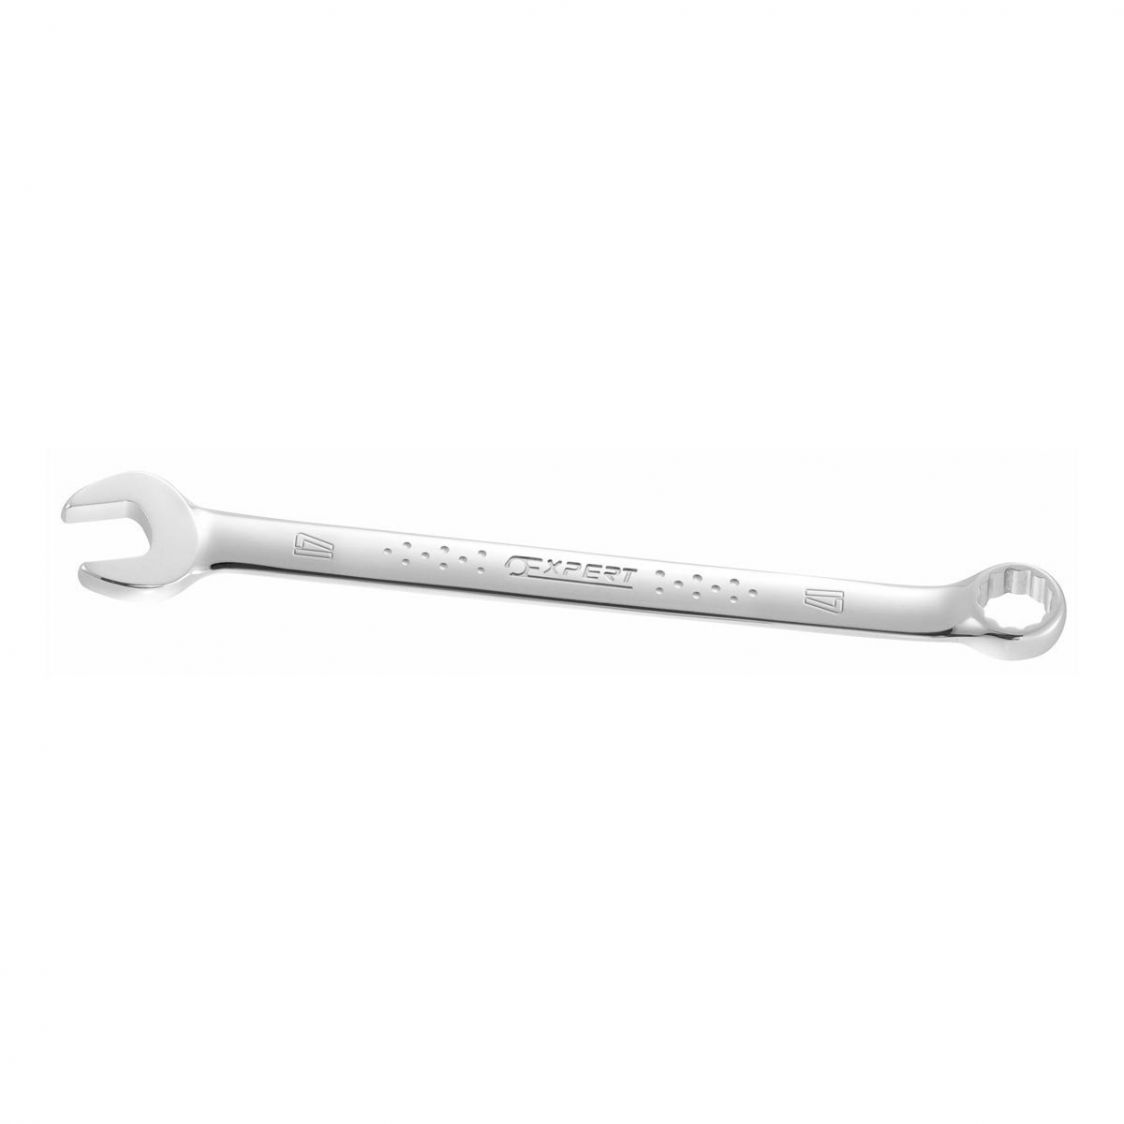 EXPERT by FACOM E117702 - 22mm Metric Long Combination Spanner